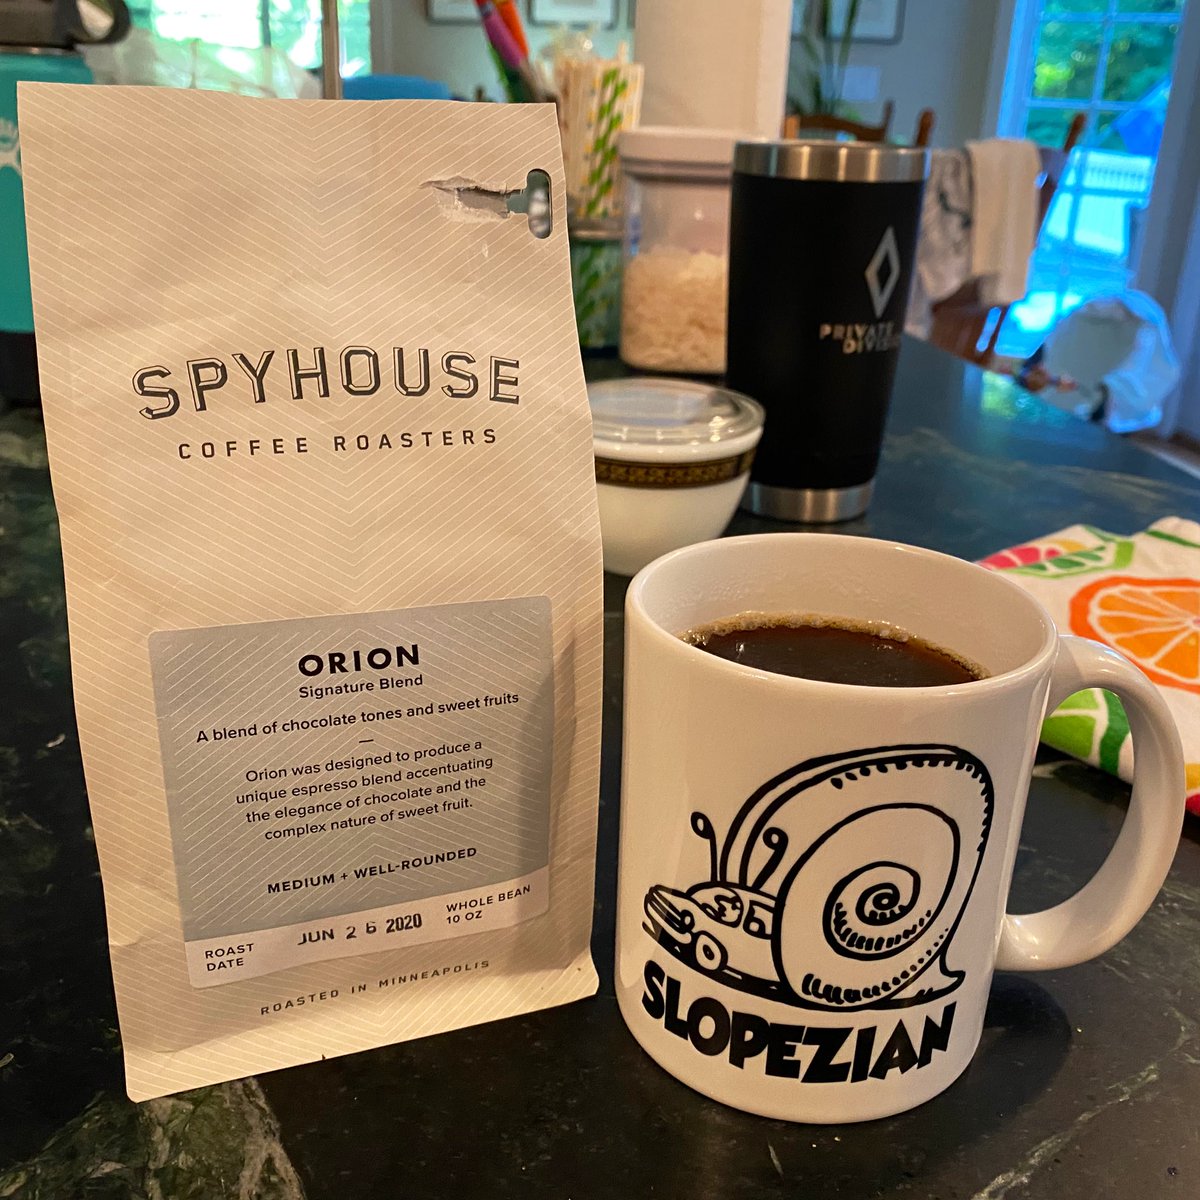 Spyhouse Coffee Roasters OrionAnother great one from Spyhouse in MPLS. A lot of depth to this one that really brings the flavor. I’ve got a hunch it would also be fantastic as cold brew.